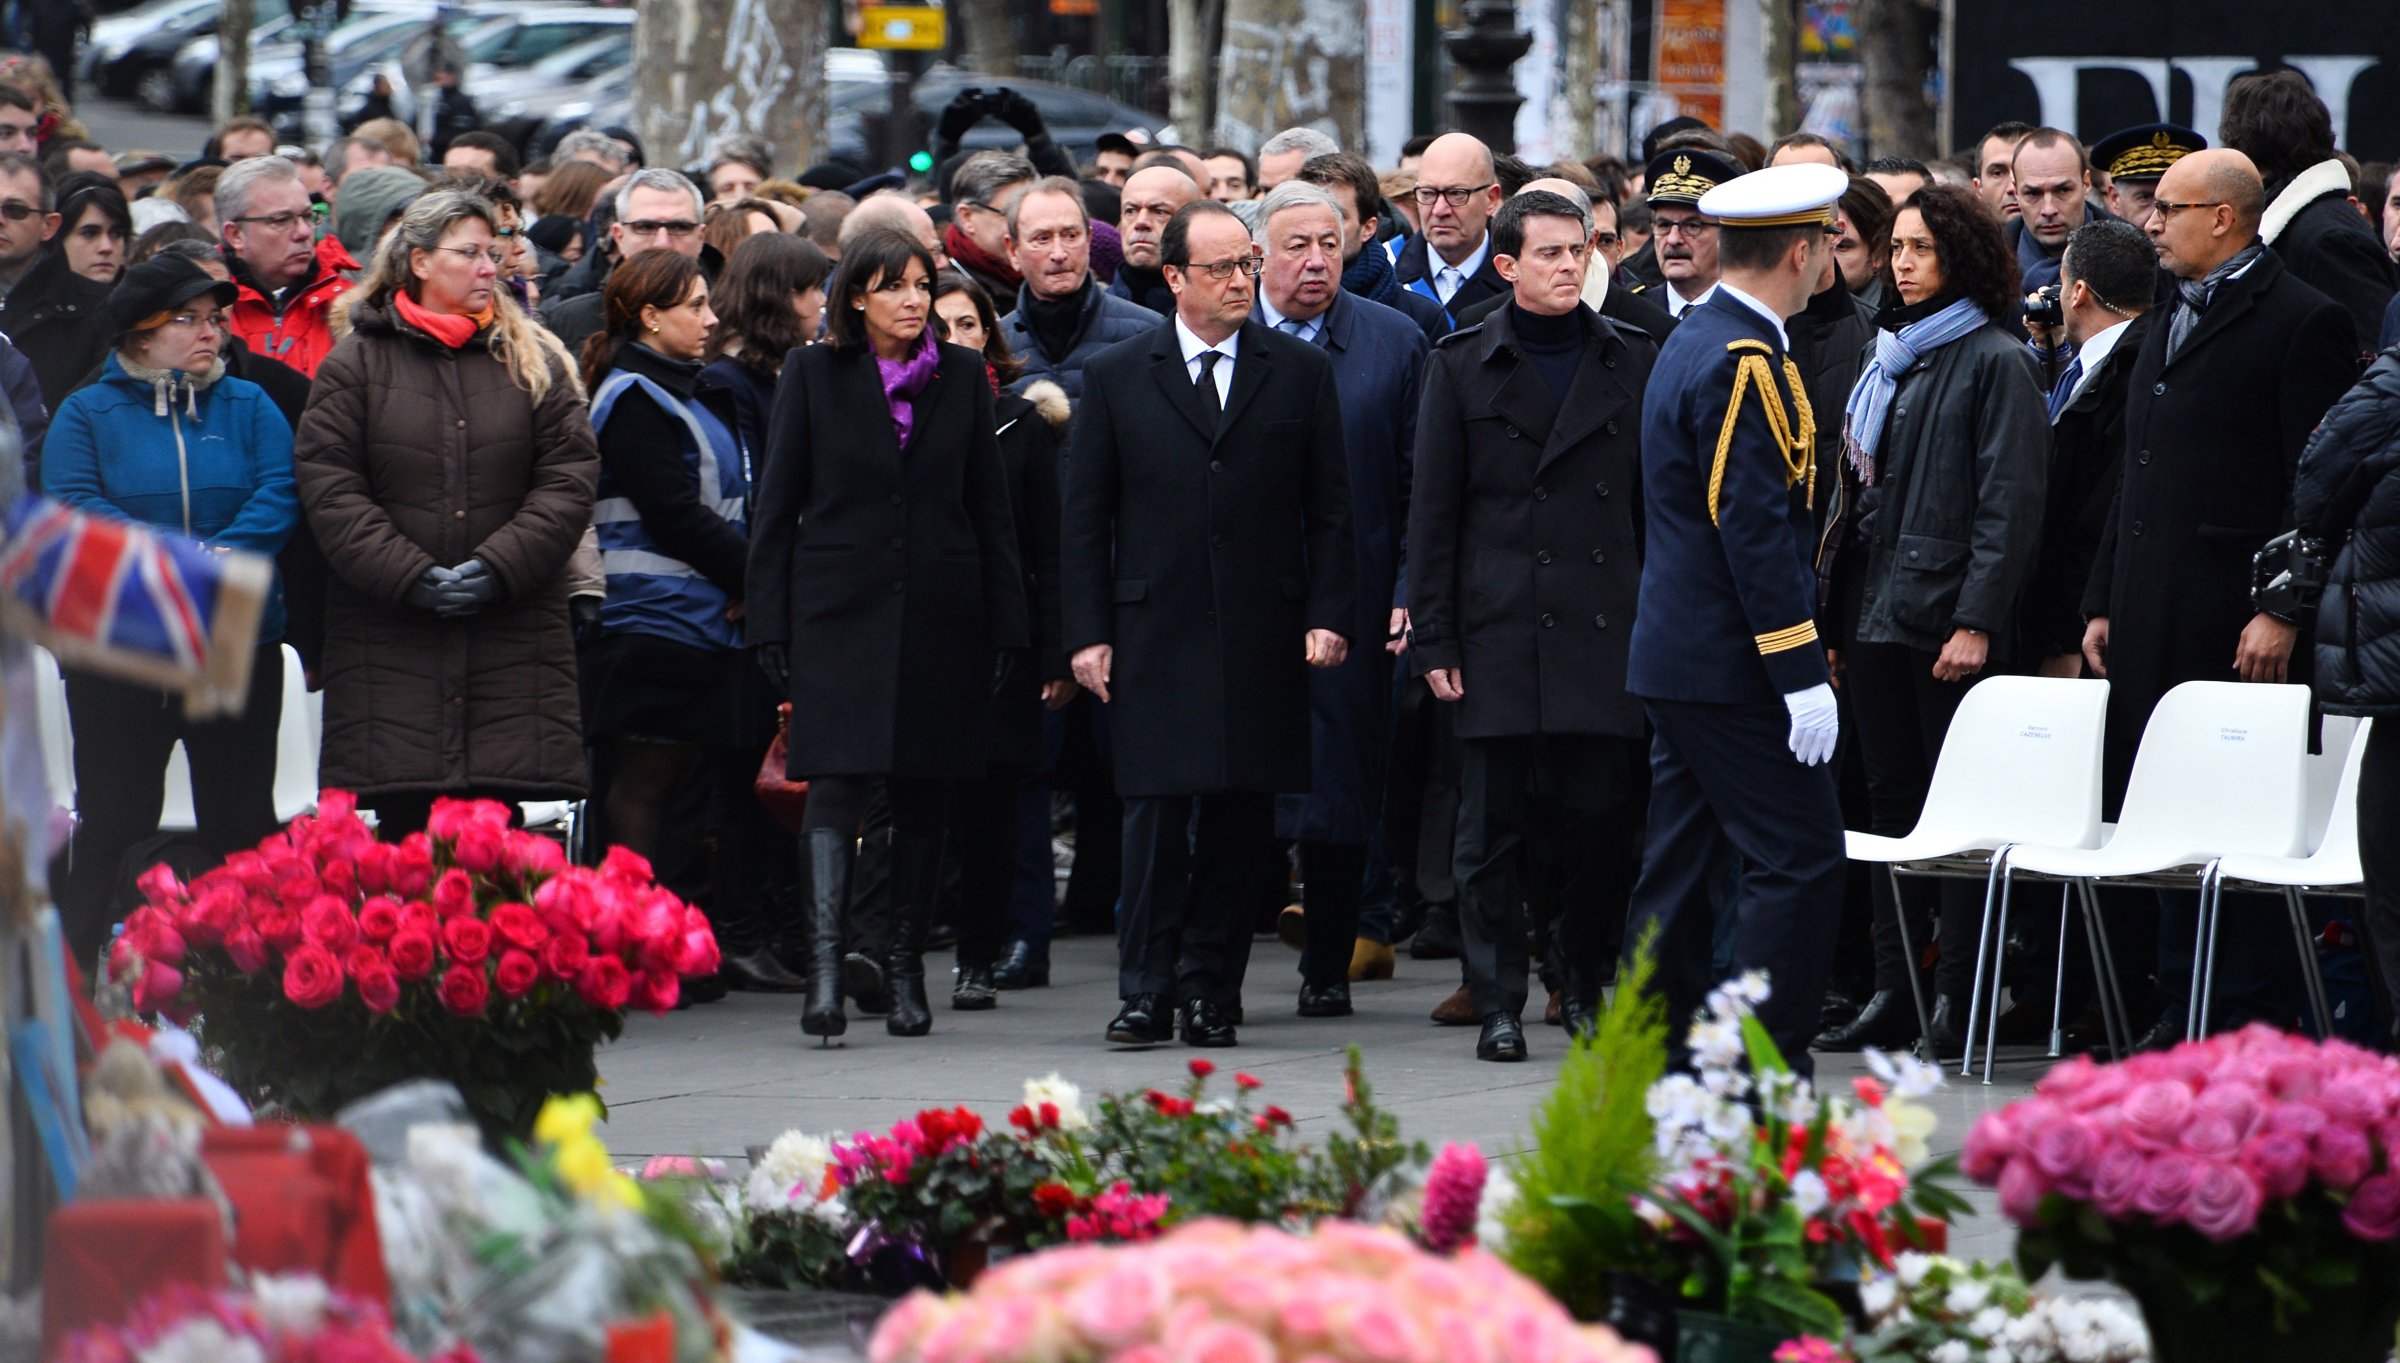 French President Francois Hollande attends a commemoration ceremony rally for Charlie Hebdo attack, at Place de la Republique in Paris on Jan. 10, 2016.